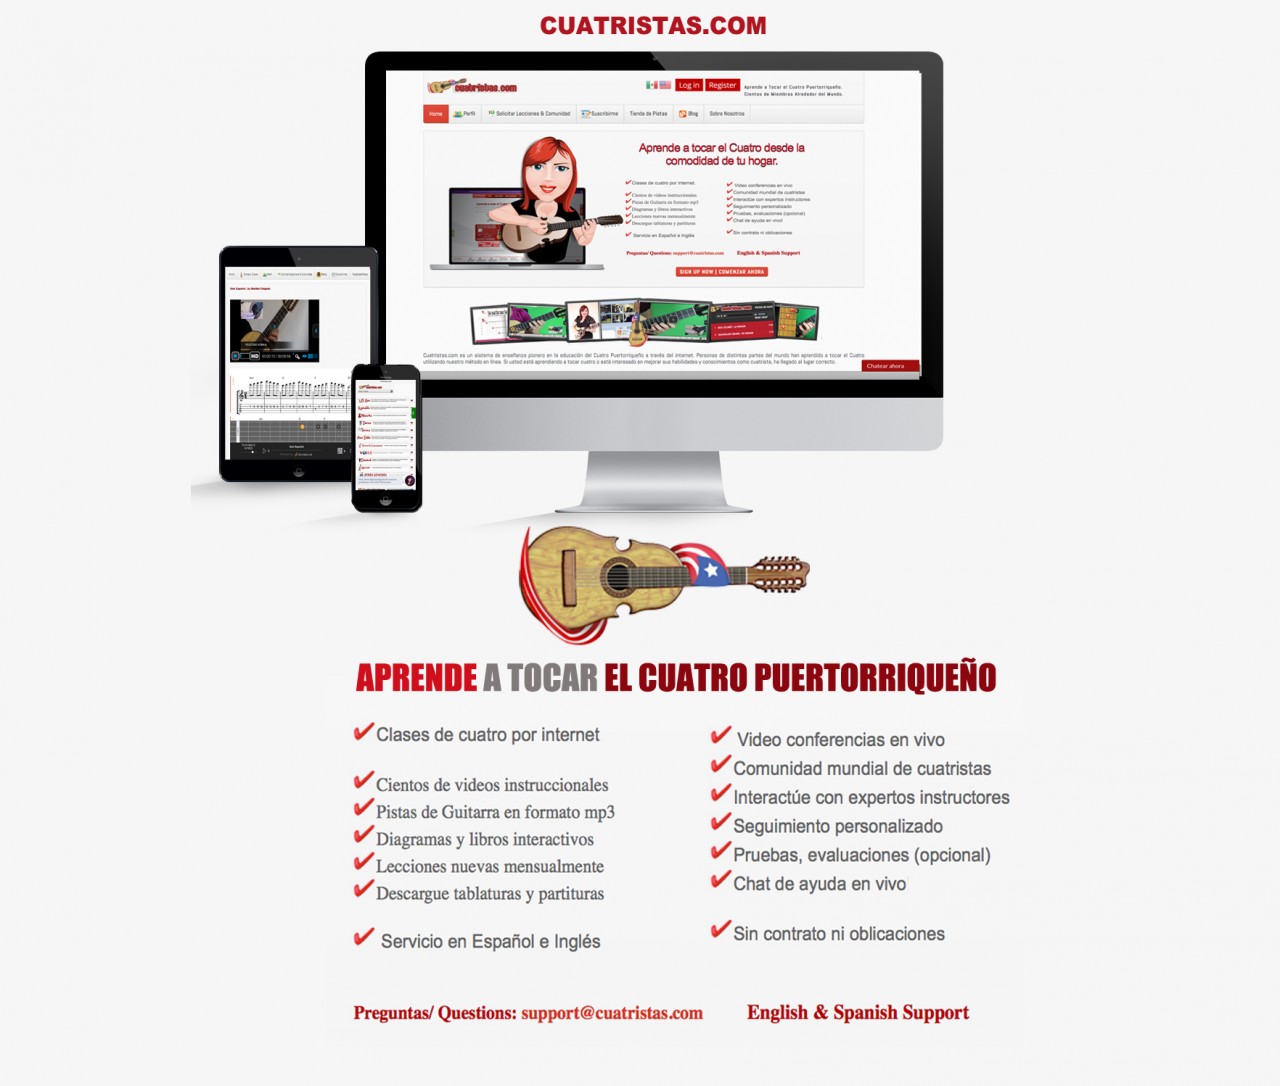 Cuatristas is now compatible with Smartphones and Tablets